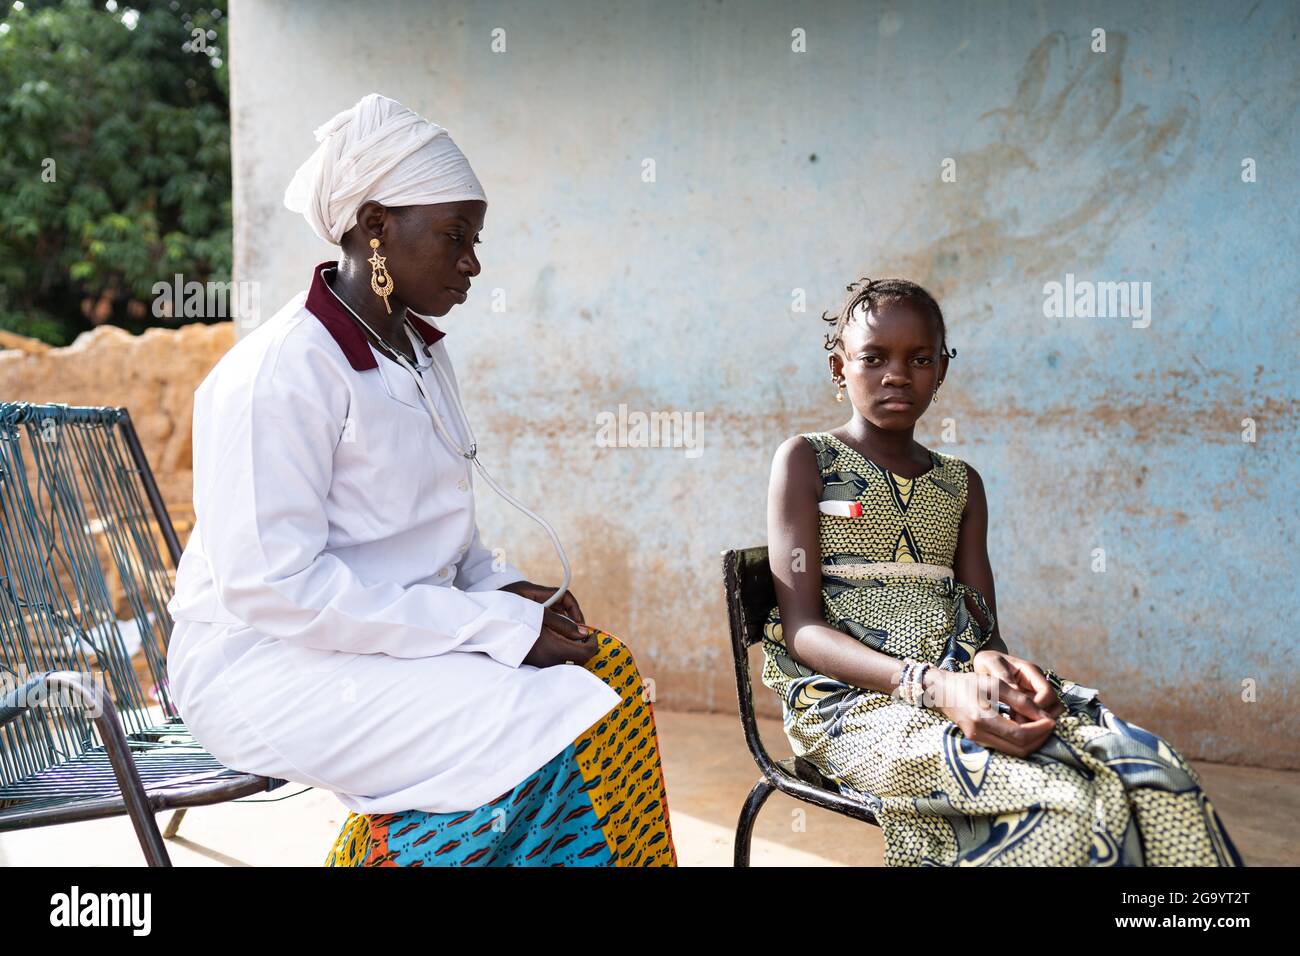 In this image, a sitting black female nurse with hands folded is watching a small African girl sitting at her side with a thermometer under her arm, b Stock Photo